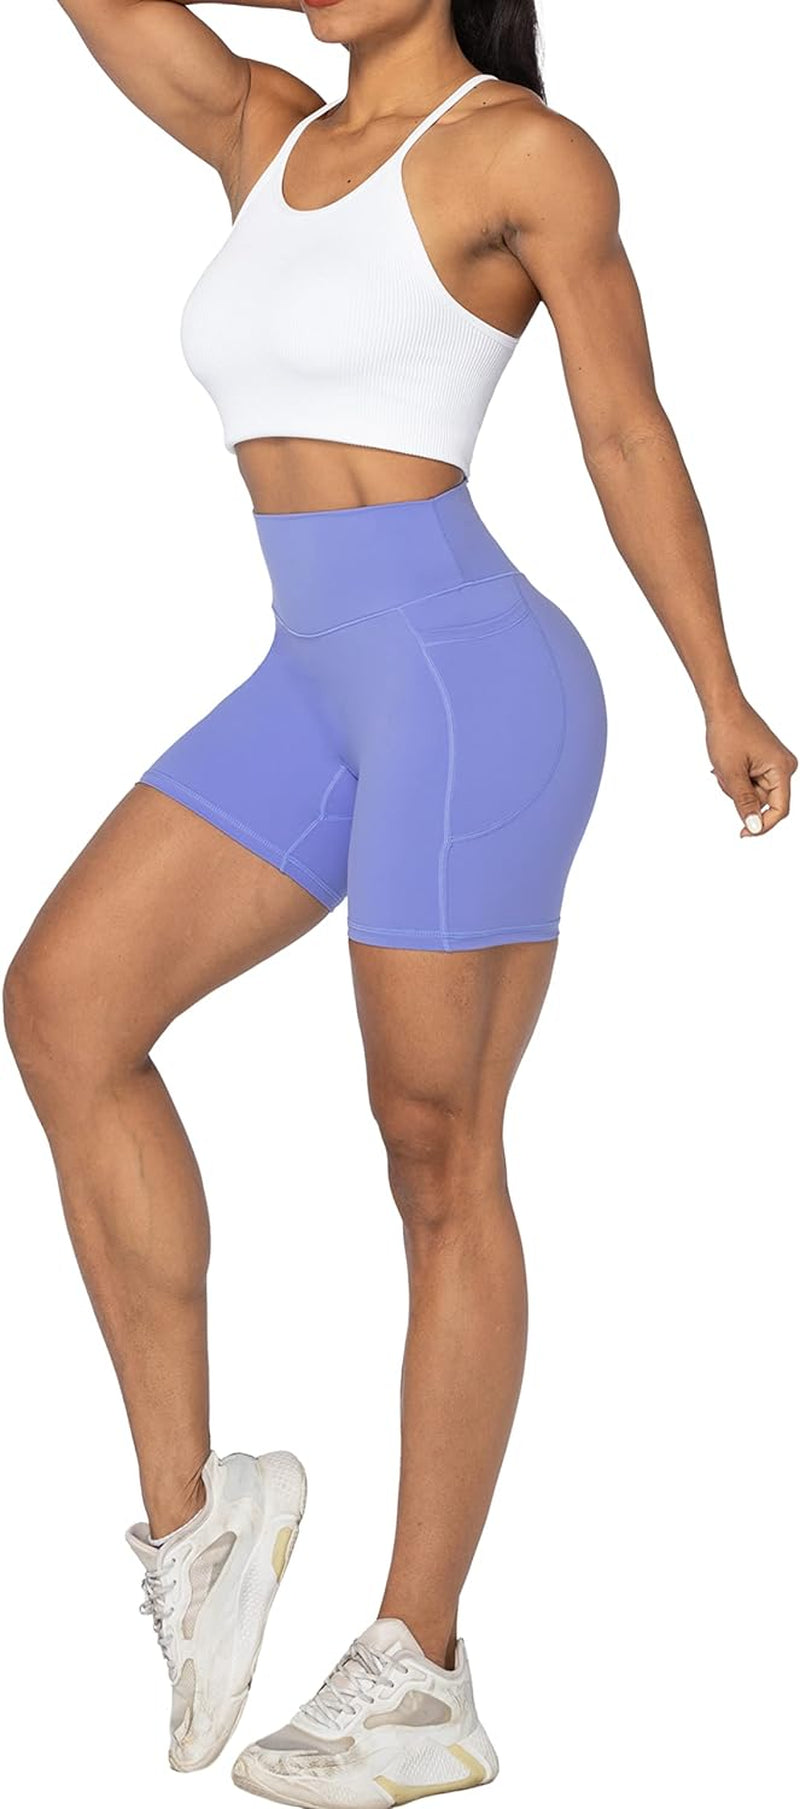 No Front Seam Biker Shorts for Women with Pockets, Yoga Workout Gym Bike Shorts with Tummy Control